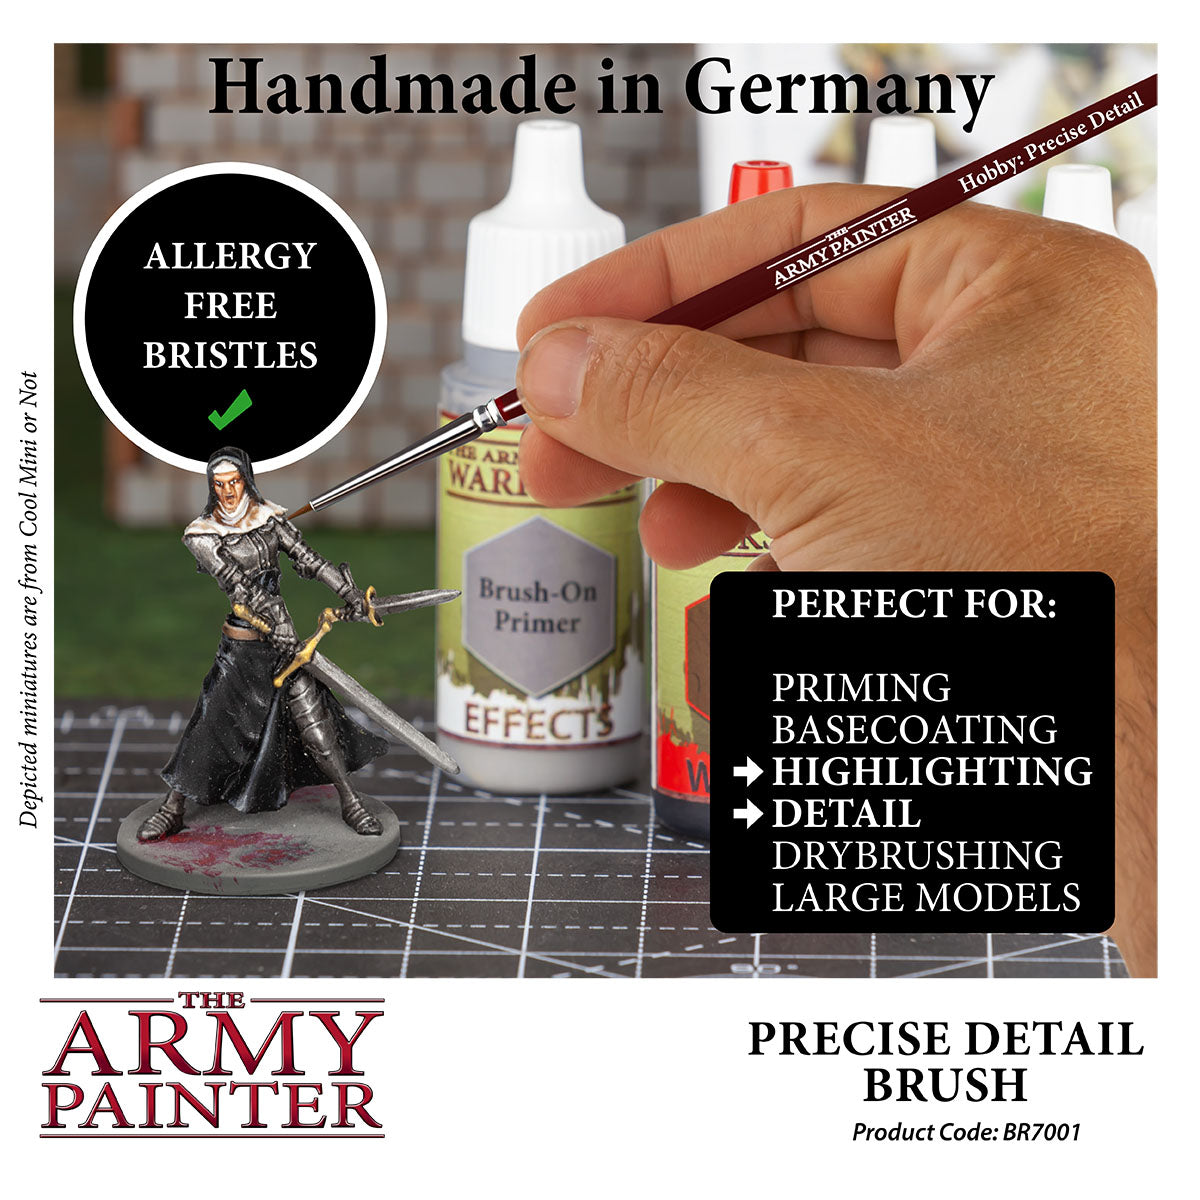 The Army Painter - Hobby Precise Detail Brush BR7001